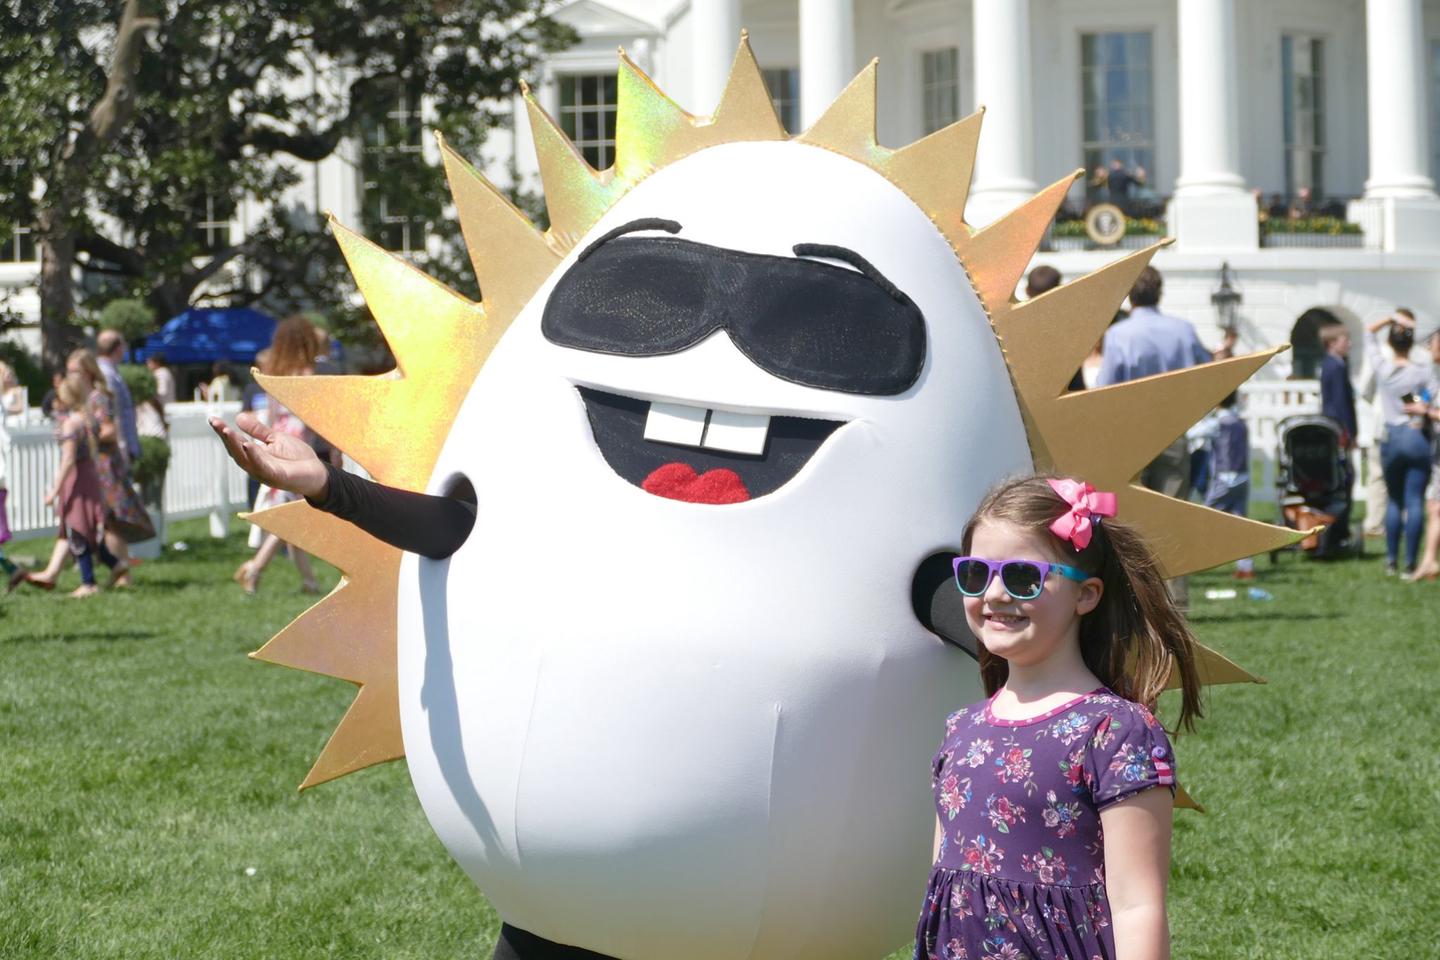 A child posing with a sunshine egg mascotGuests attend the White House Easter Egg Roll, on the South Lawn of the White House. 